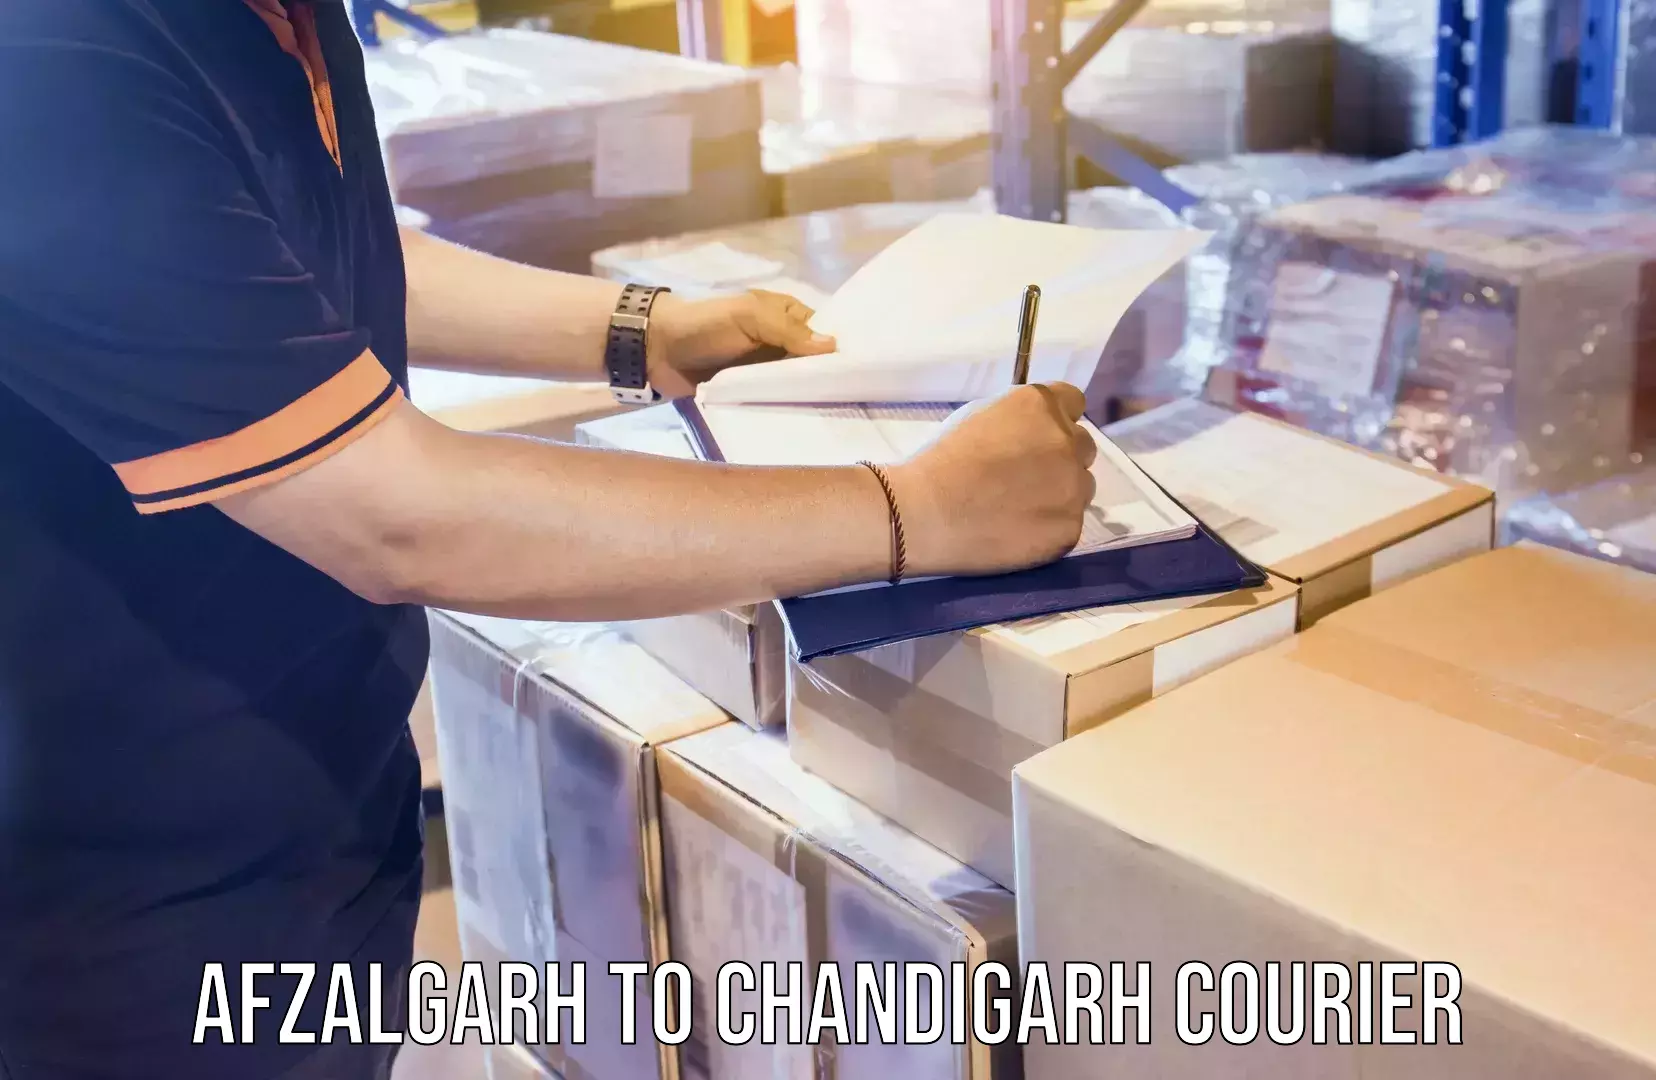 24-hour delivery options Afzalgarh to Chandigarh